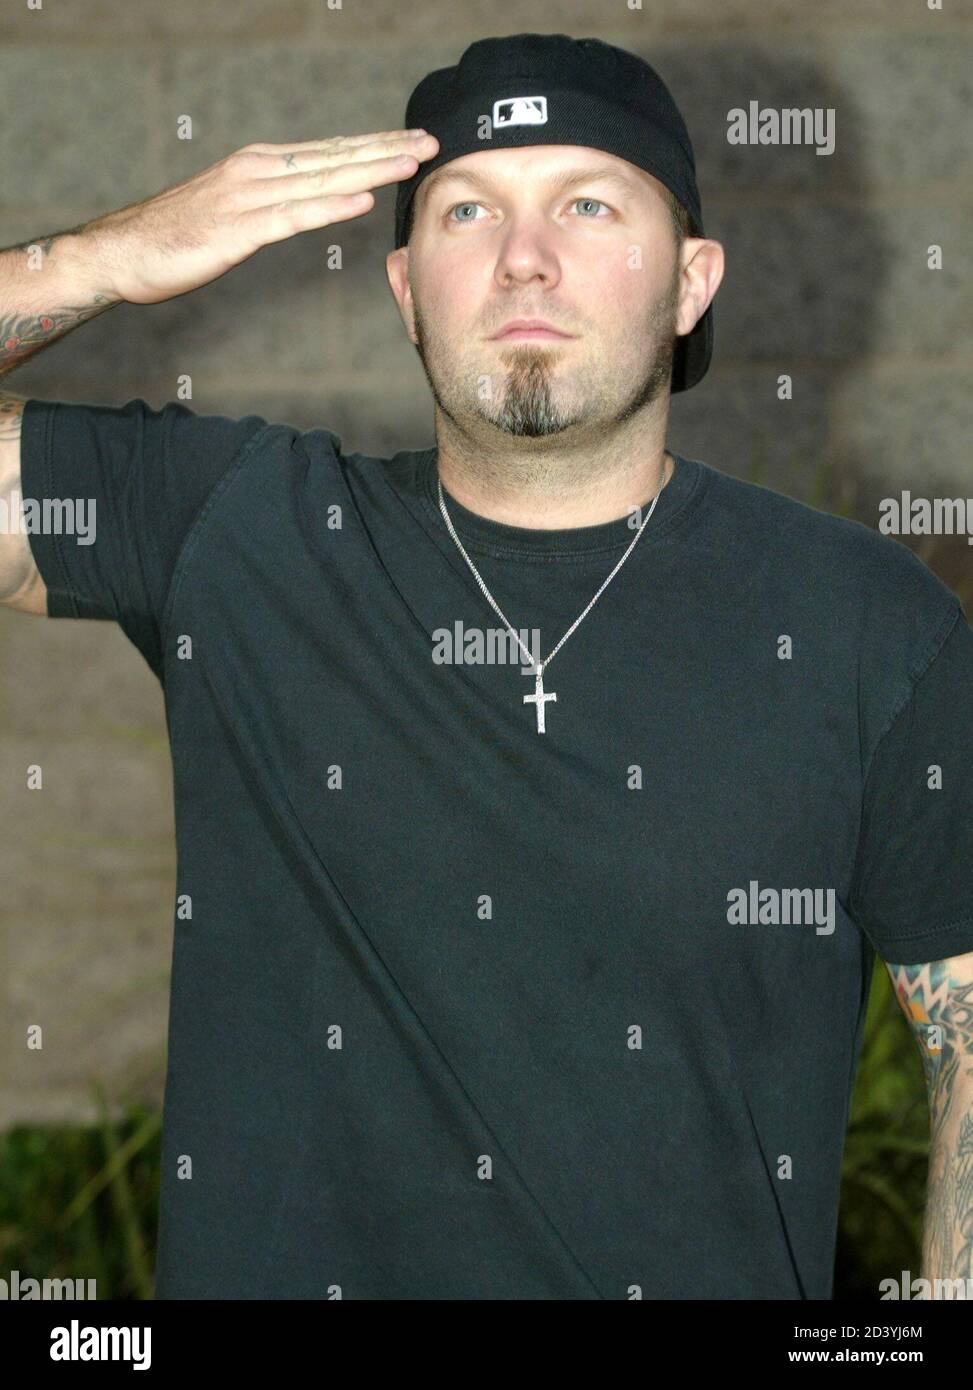 Fred Durst, singer of the rock group Limp Bizkit, strikes a pose as he makes his way down an arrival line at the 2002 Billboard Music Awards show at the MGM Grand Garden Arena in Las Vegas, Nevada, December 9, 2002. [Durst helped introduce a performance of the band Puddle of Mudd during the show. ] Stock Photo